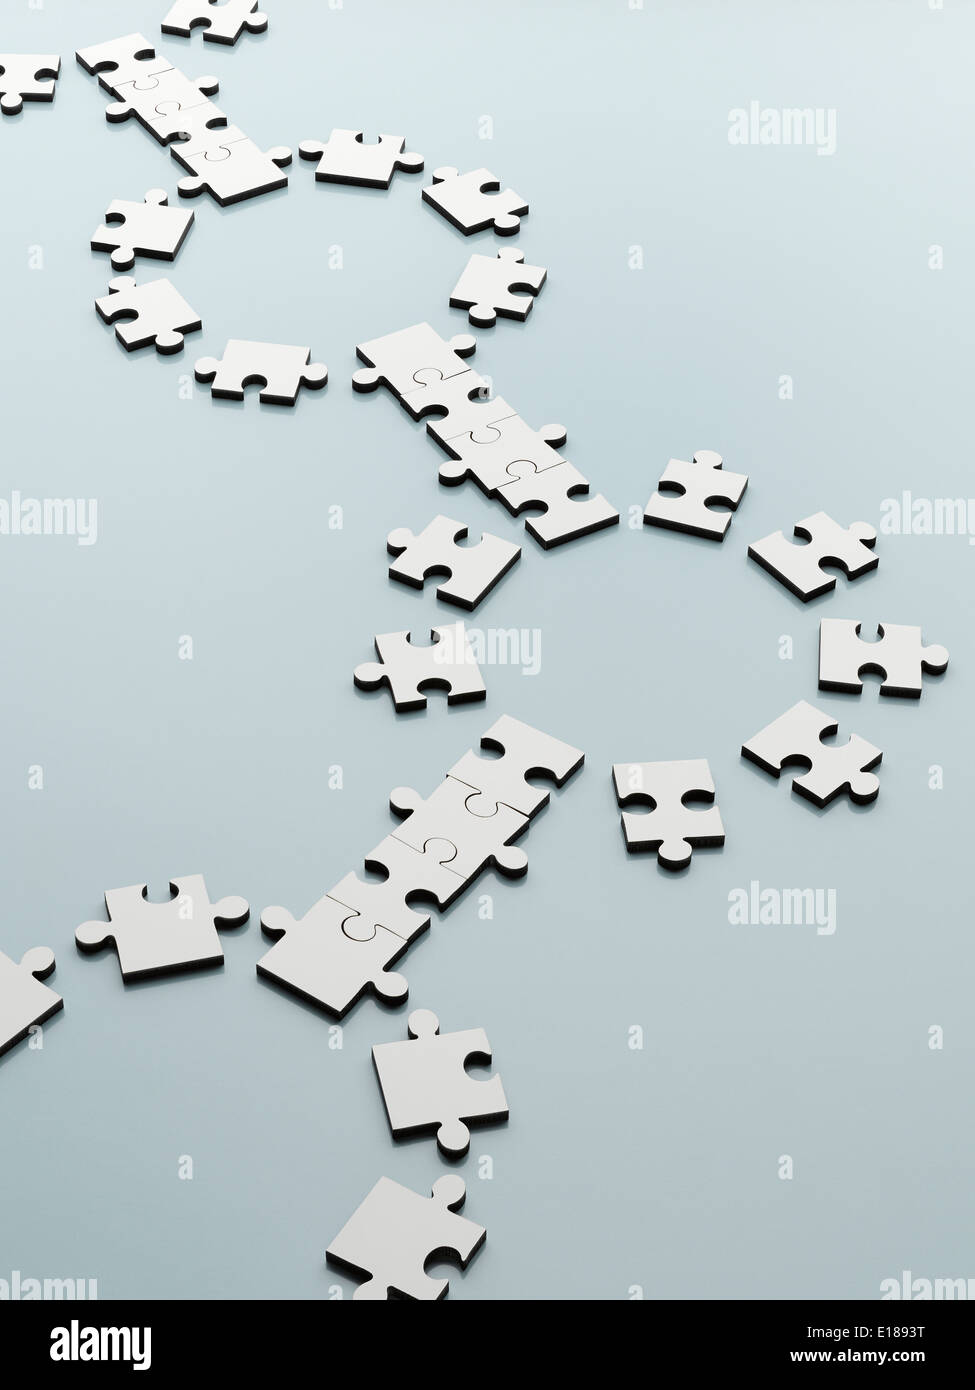 Connecting jigsaw pieces Stock Photo